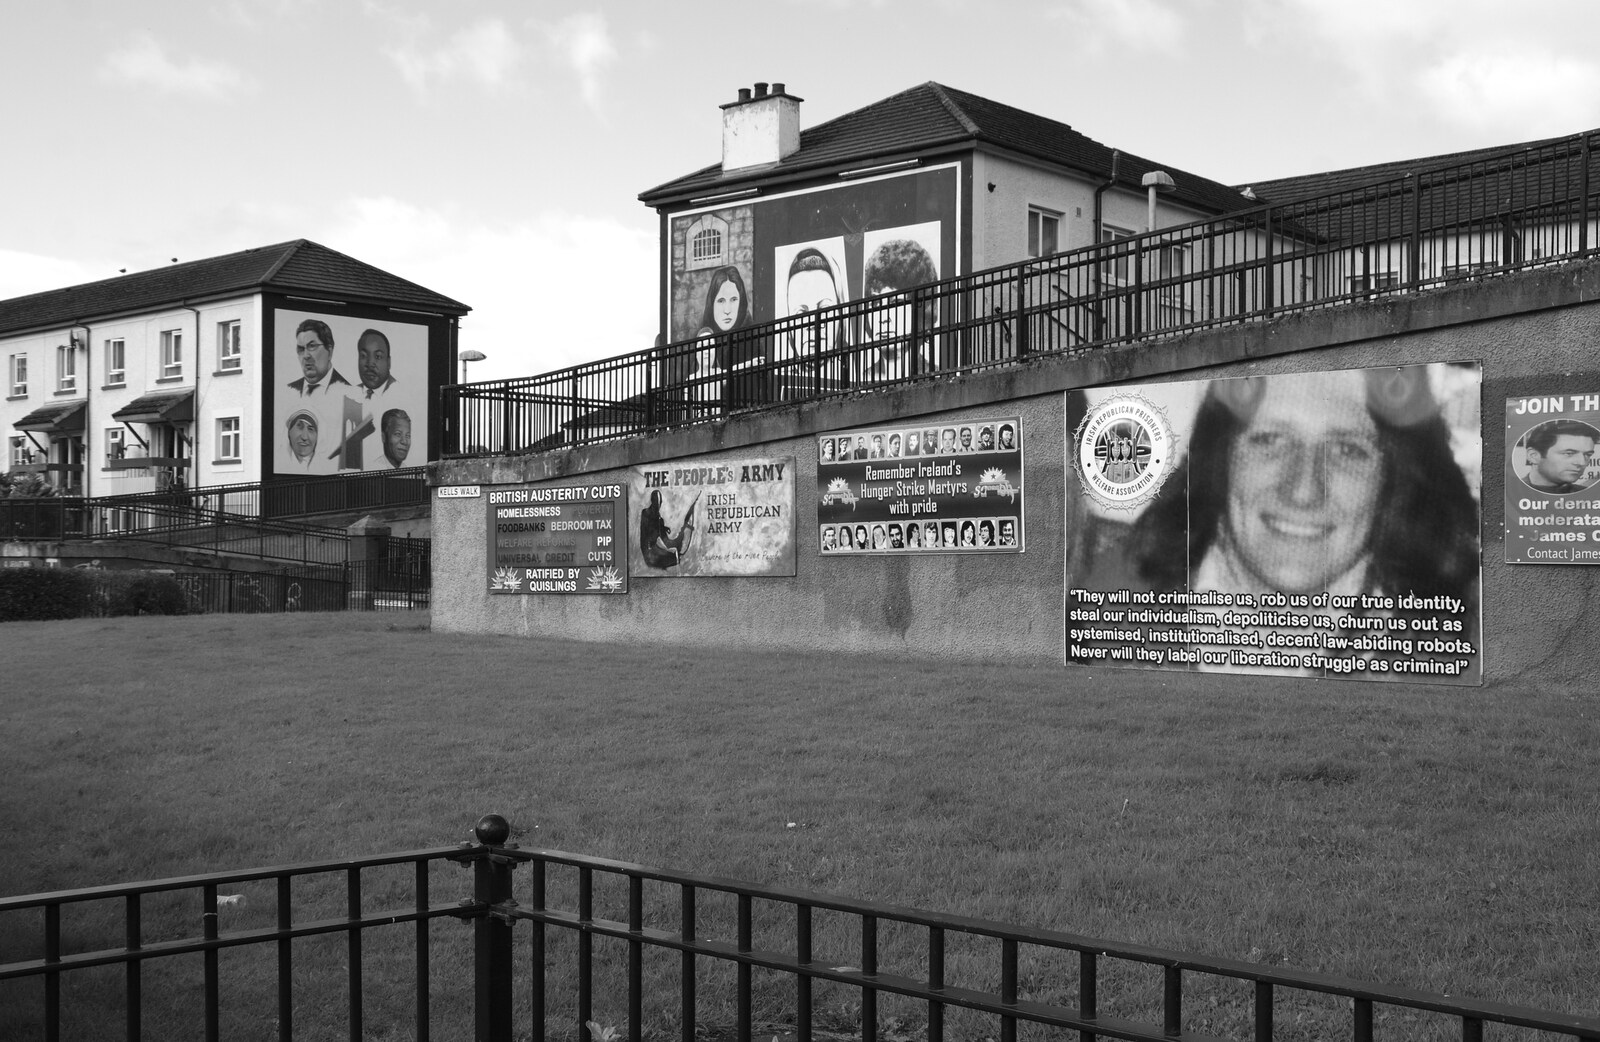 Bobby Sands and various other Nationalist graffiti from A Day in Derry, County Londonderry, Northern Ireland - 15th August 2019